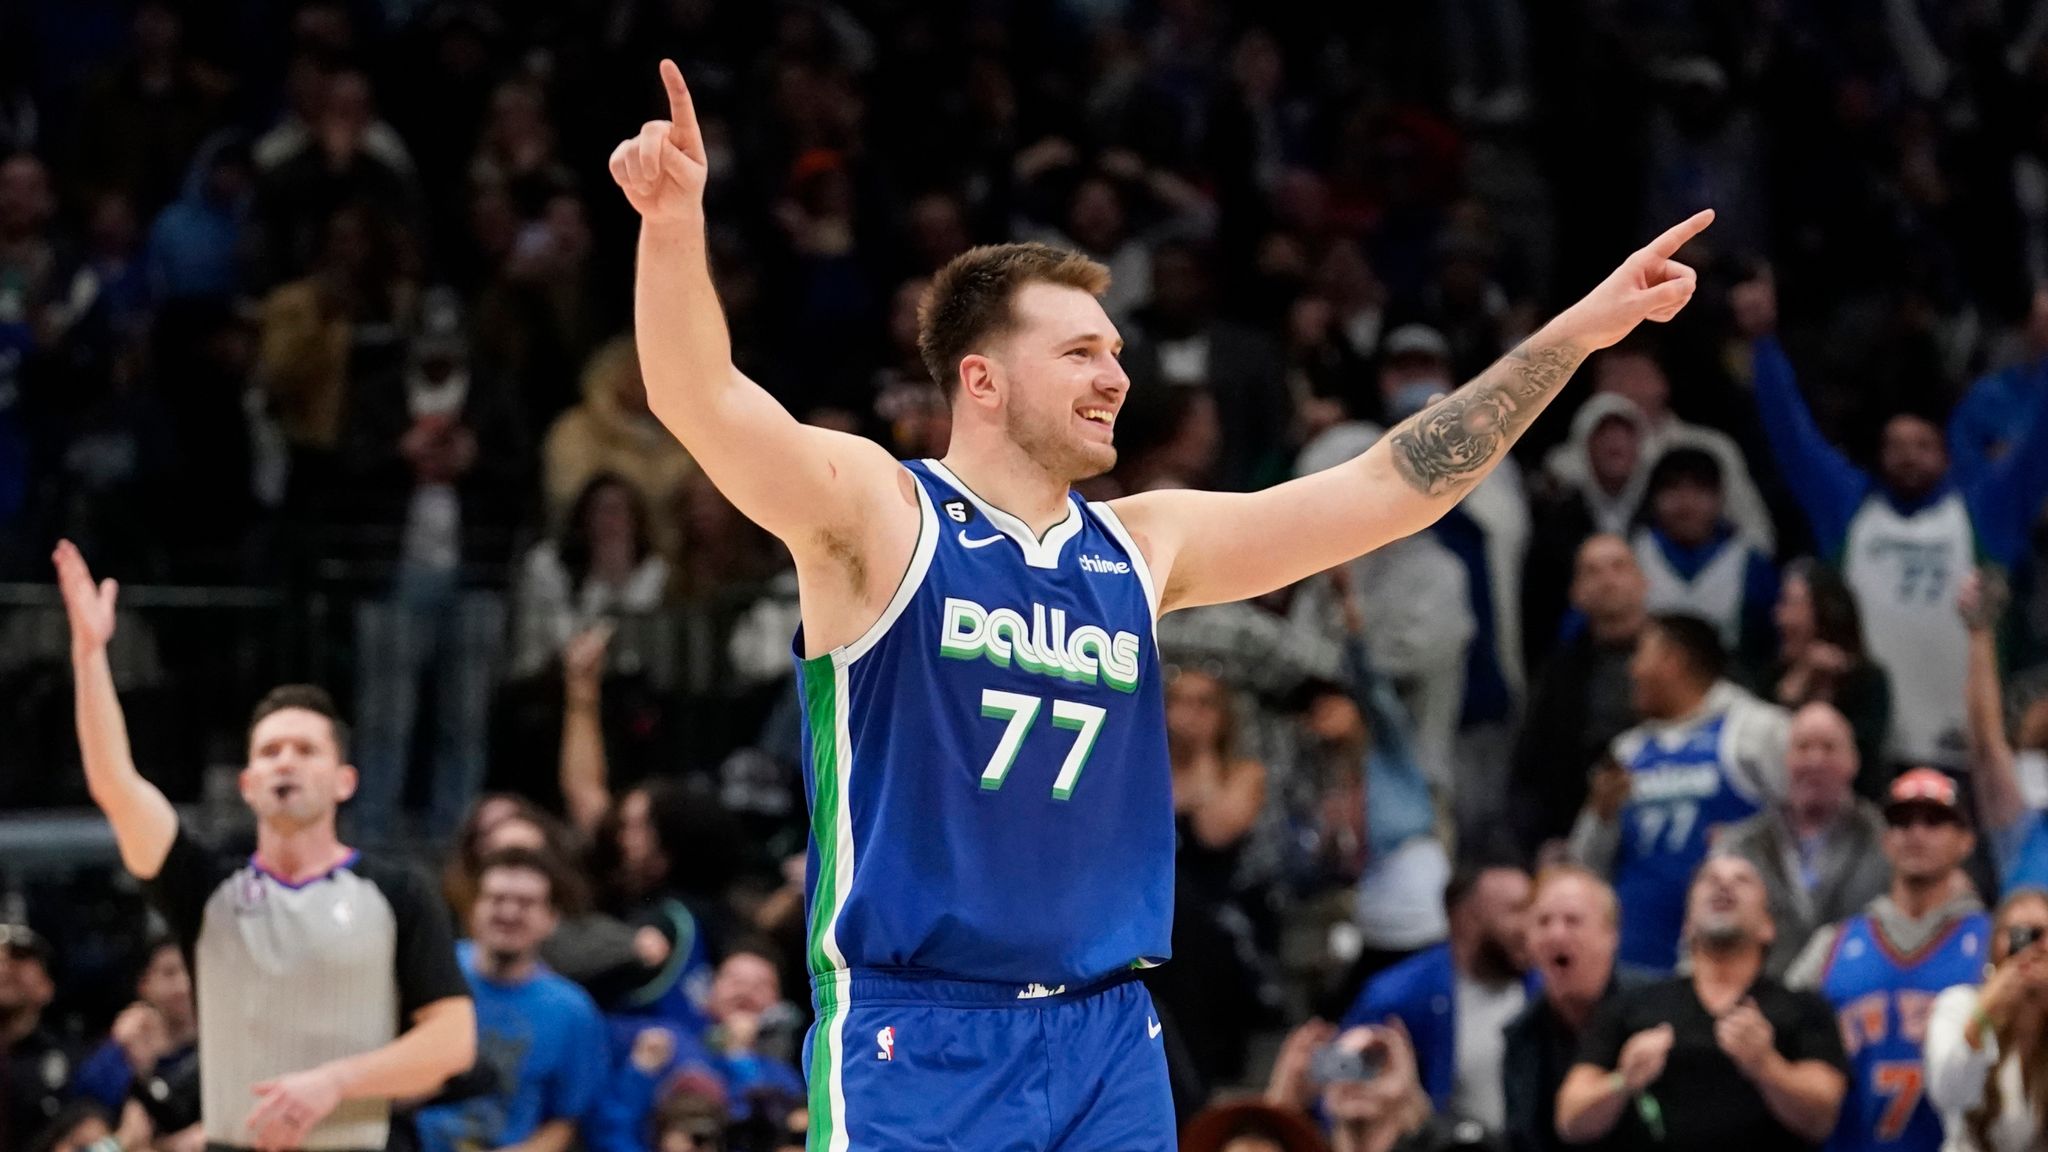 Dallas Mavs Star Luka Doncic Reaches Many Milestones with 60-Point